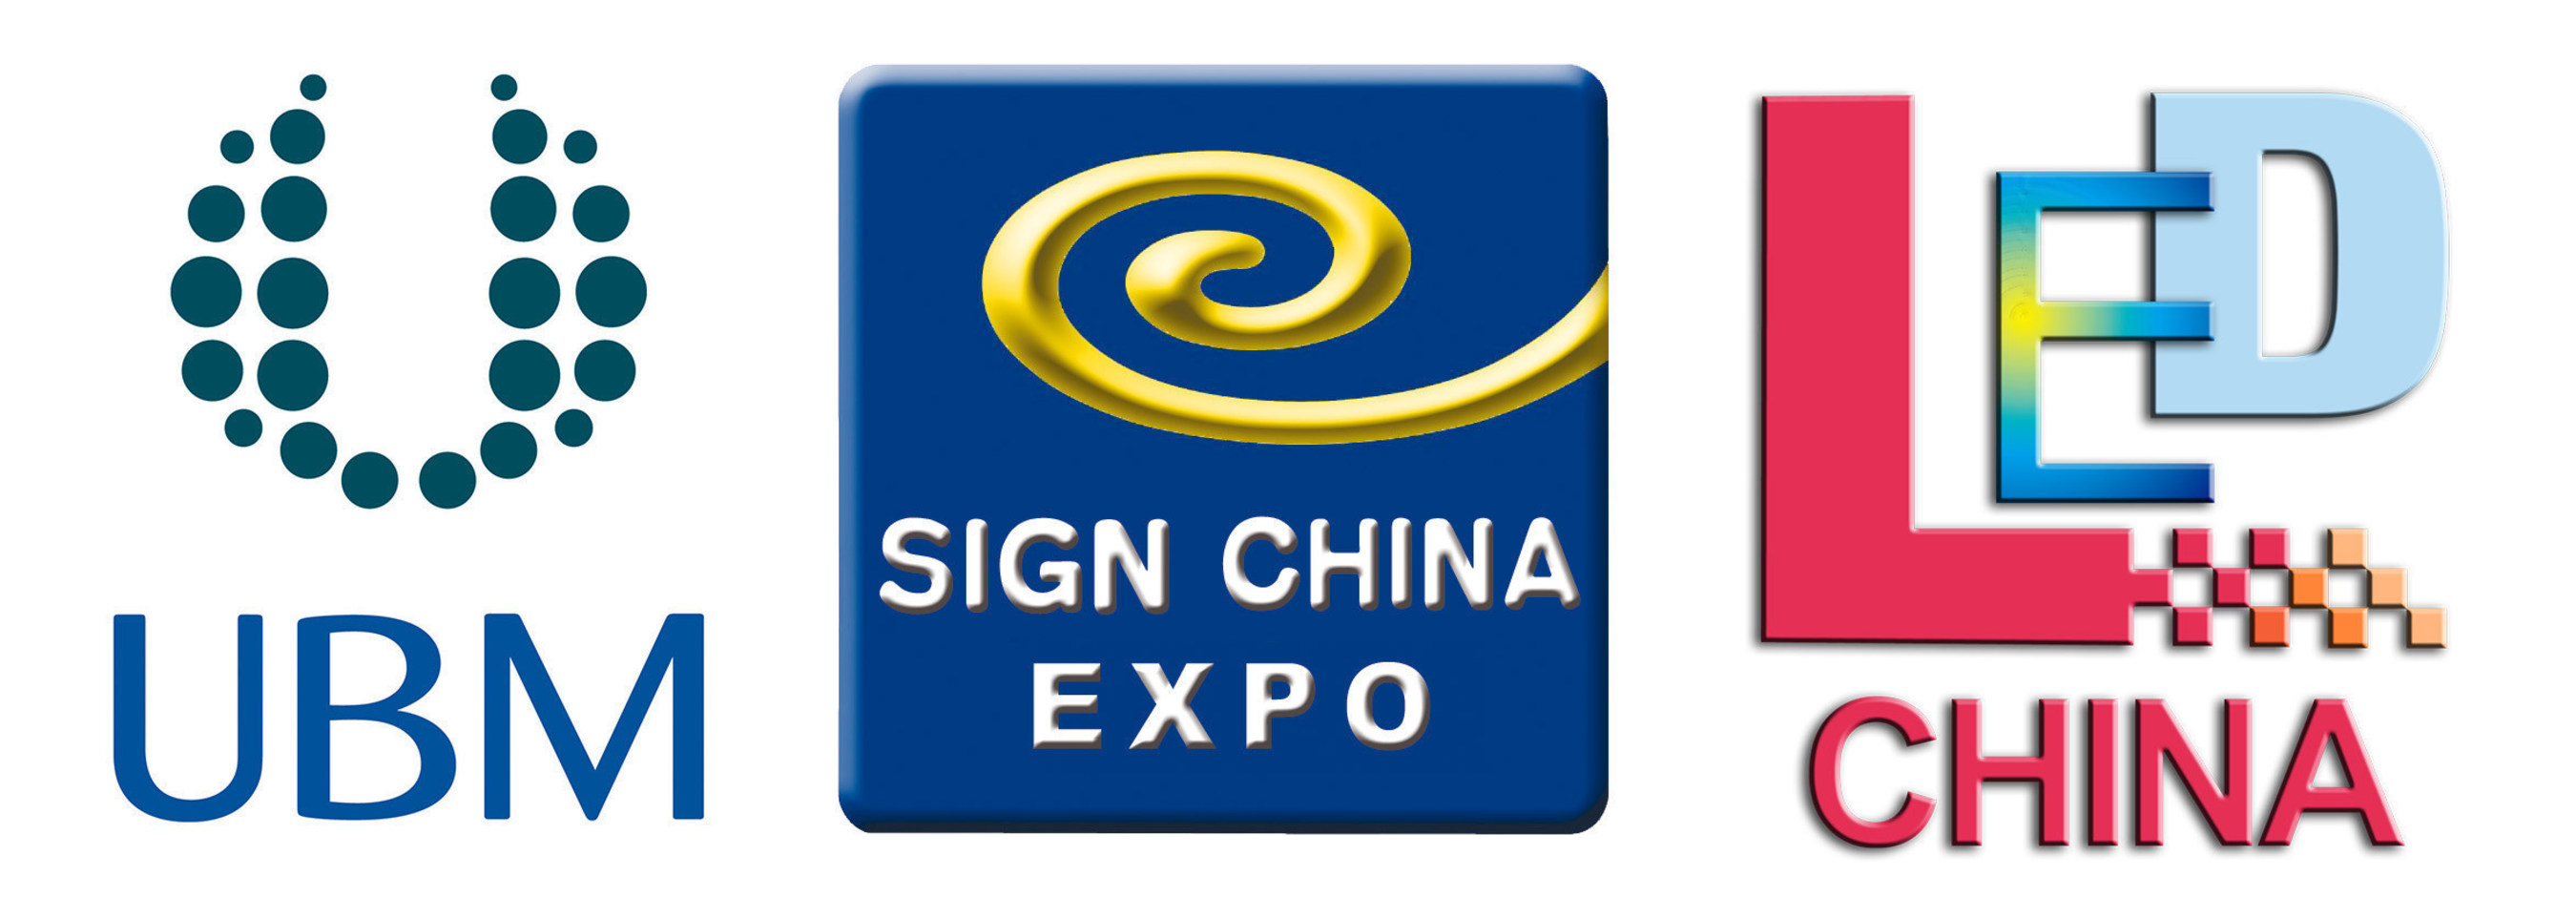 SIGN CHINA, LED CHINA 2016 Exposition 19-22 September, SNIEC